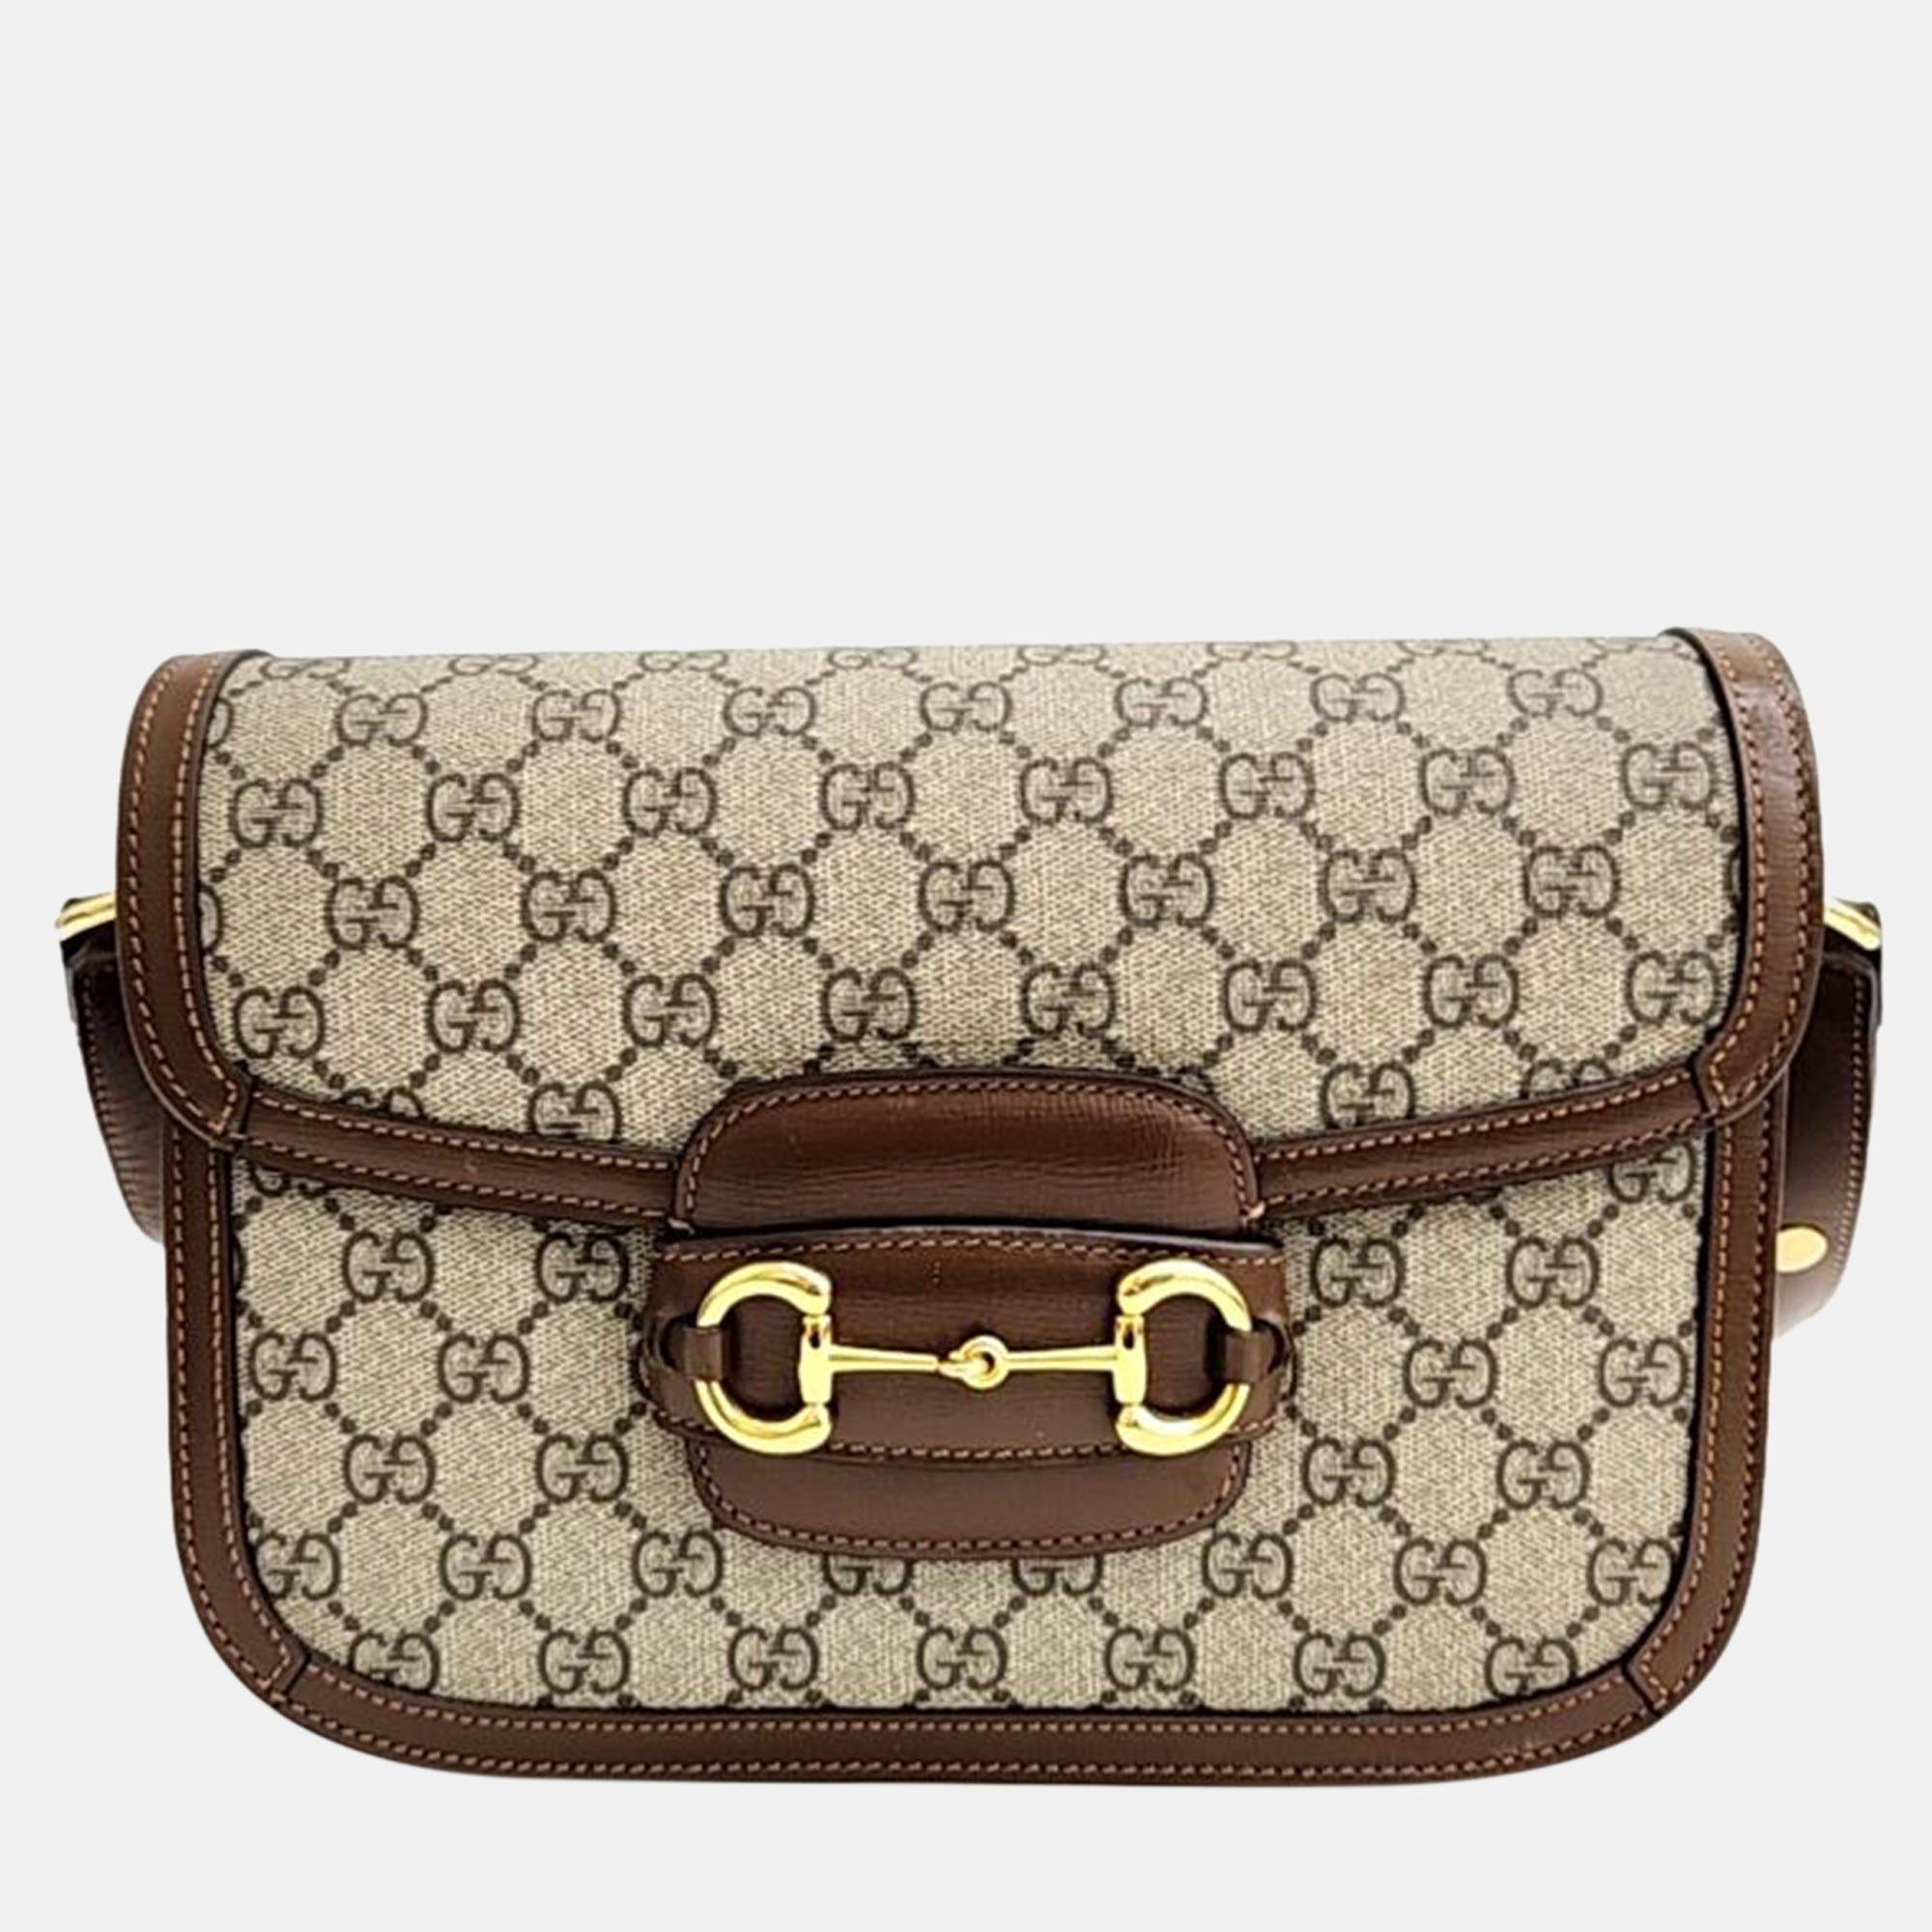 Carry this lovely Gucci shoulder bag as a stylish accompaniment to your ensemble. Made from high quality materials it has a luxe look and durable quality.